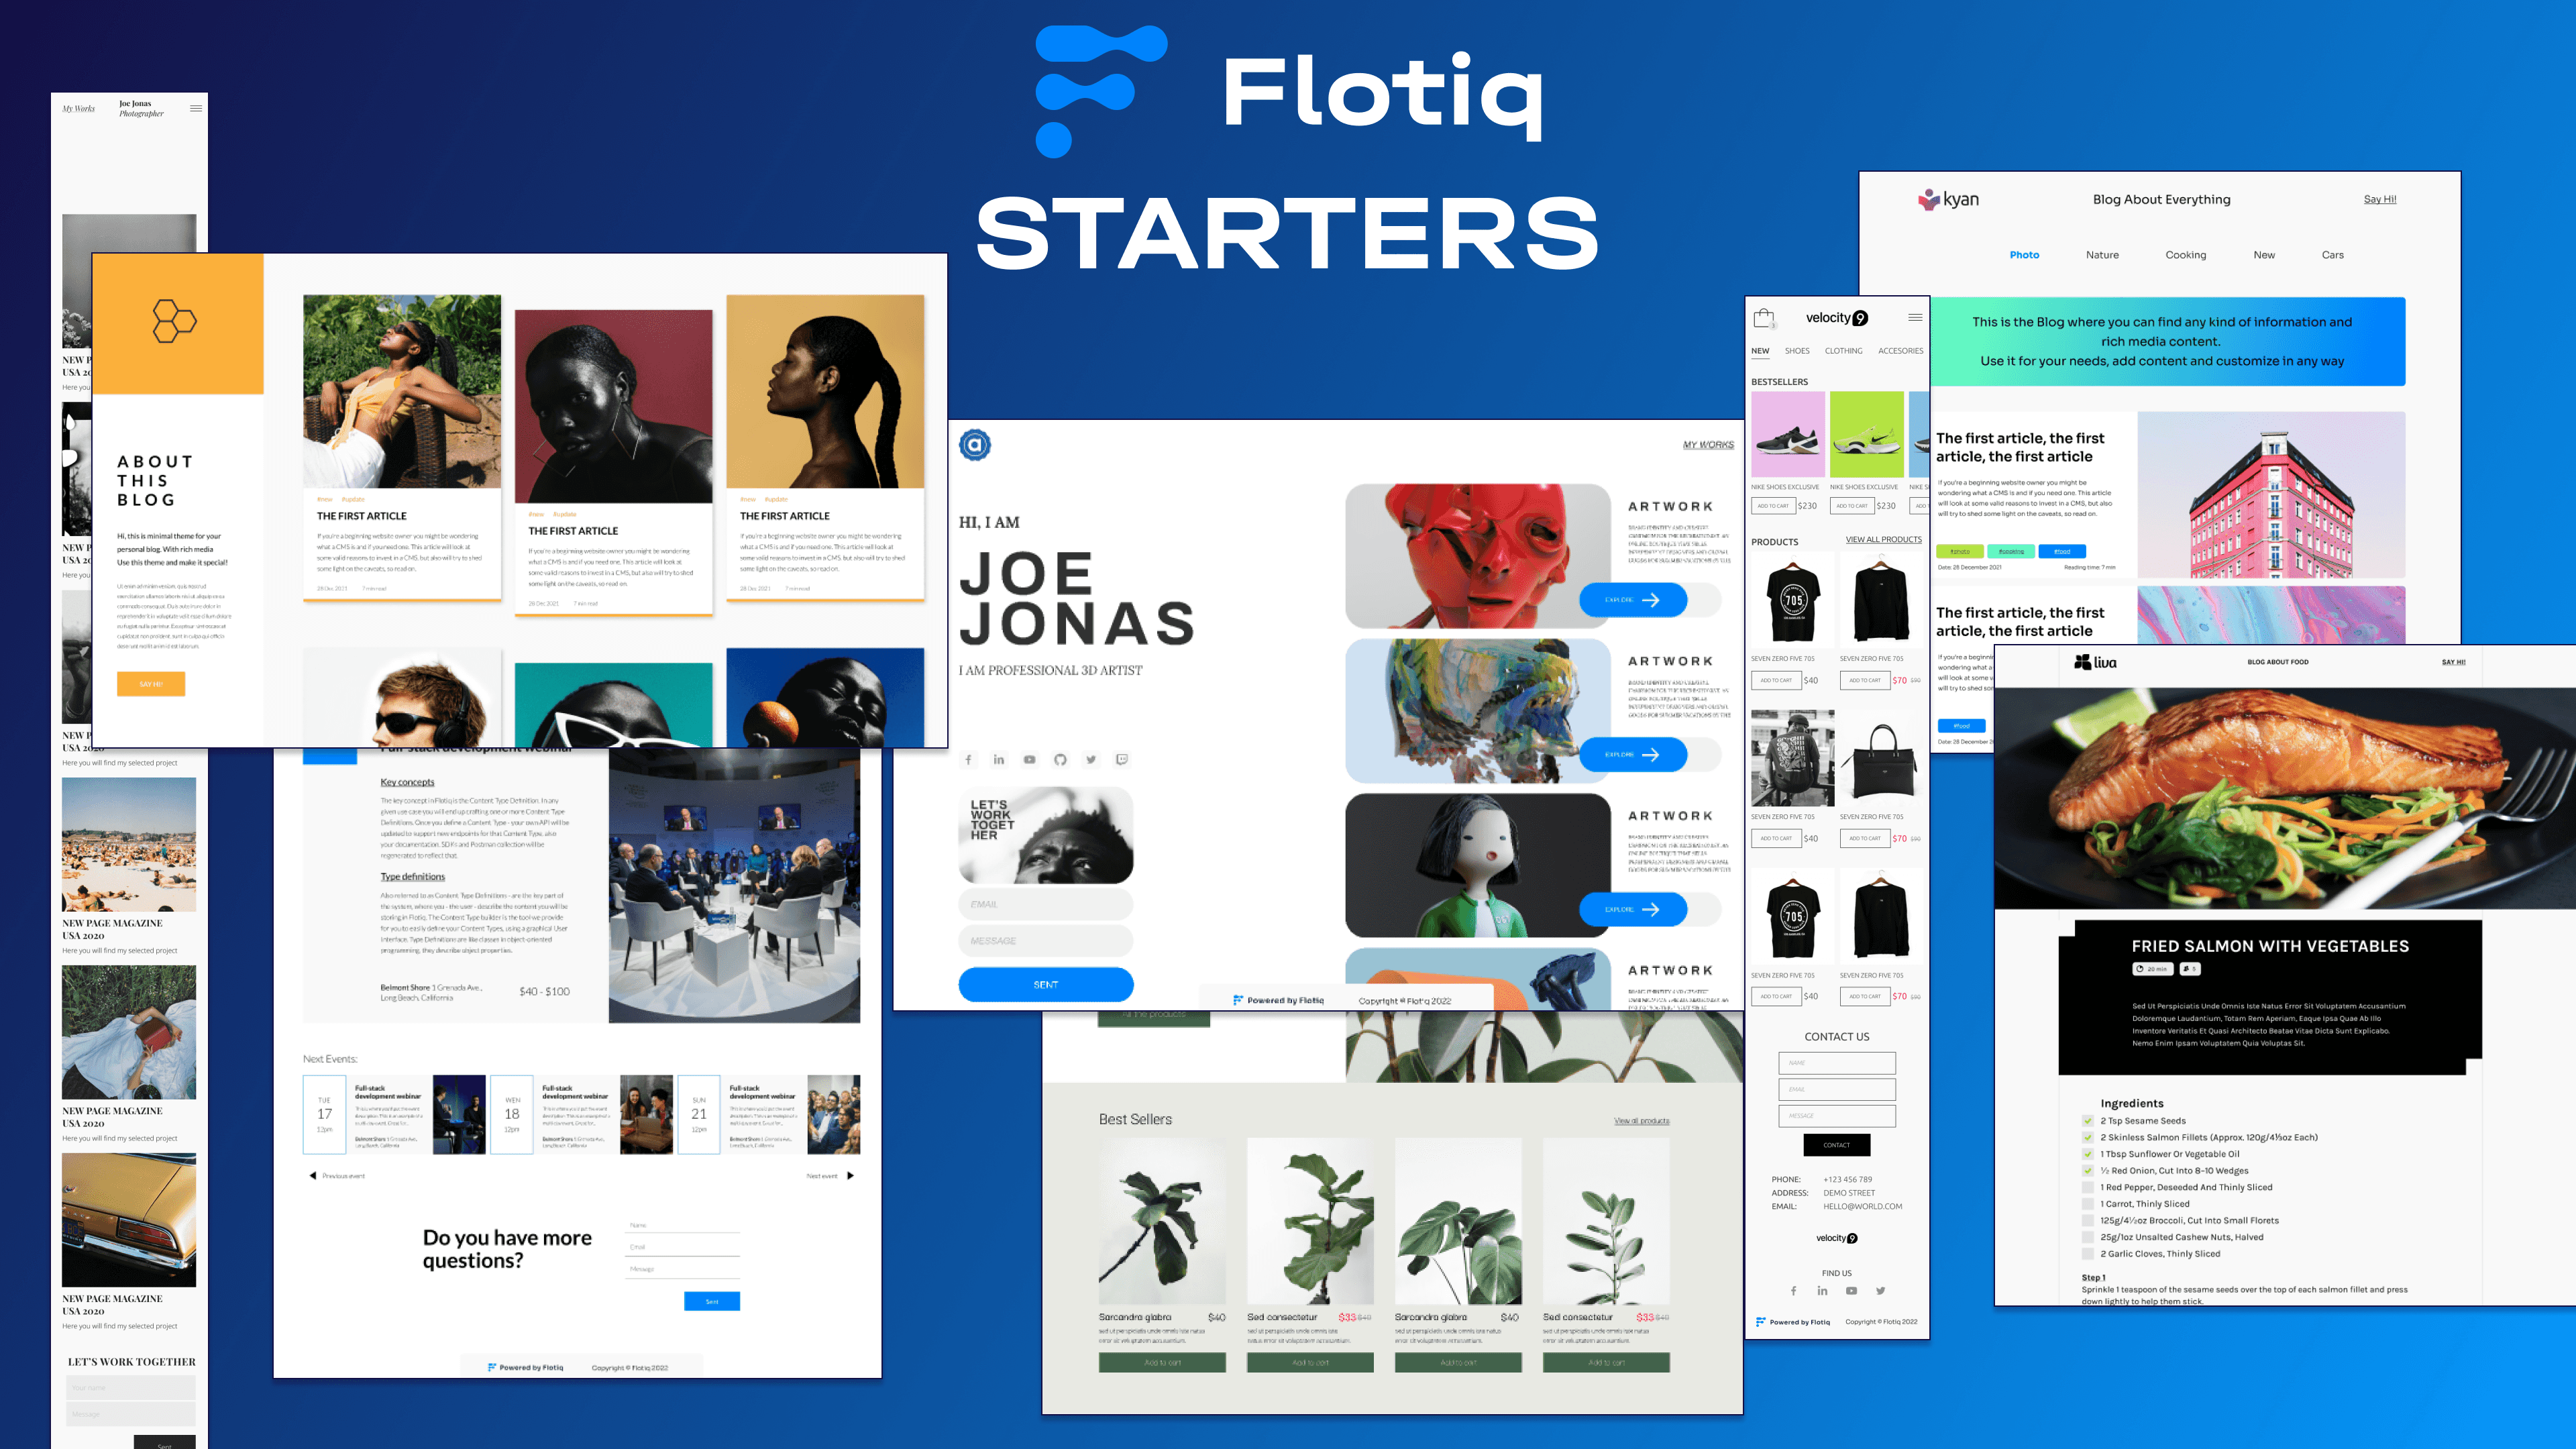 How to speed up your work process with Flotiq Starters